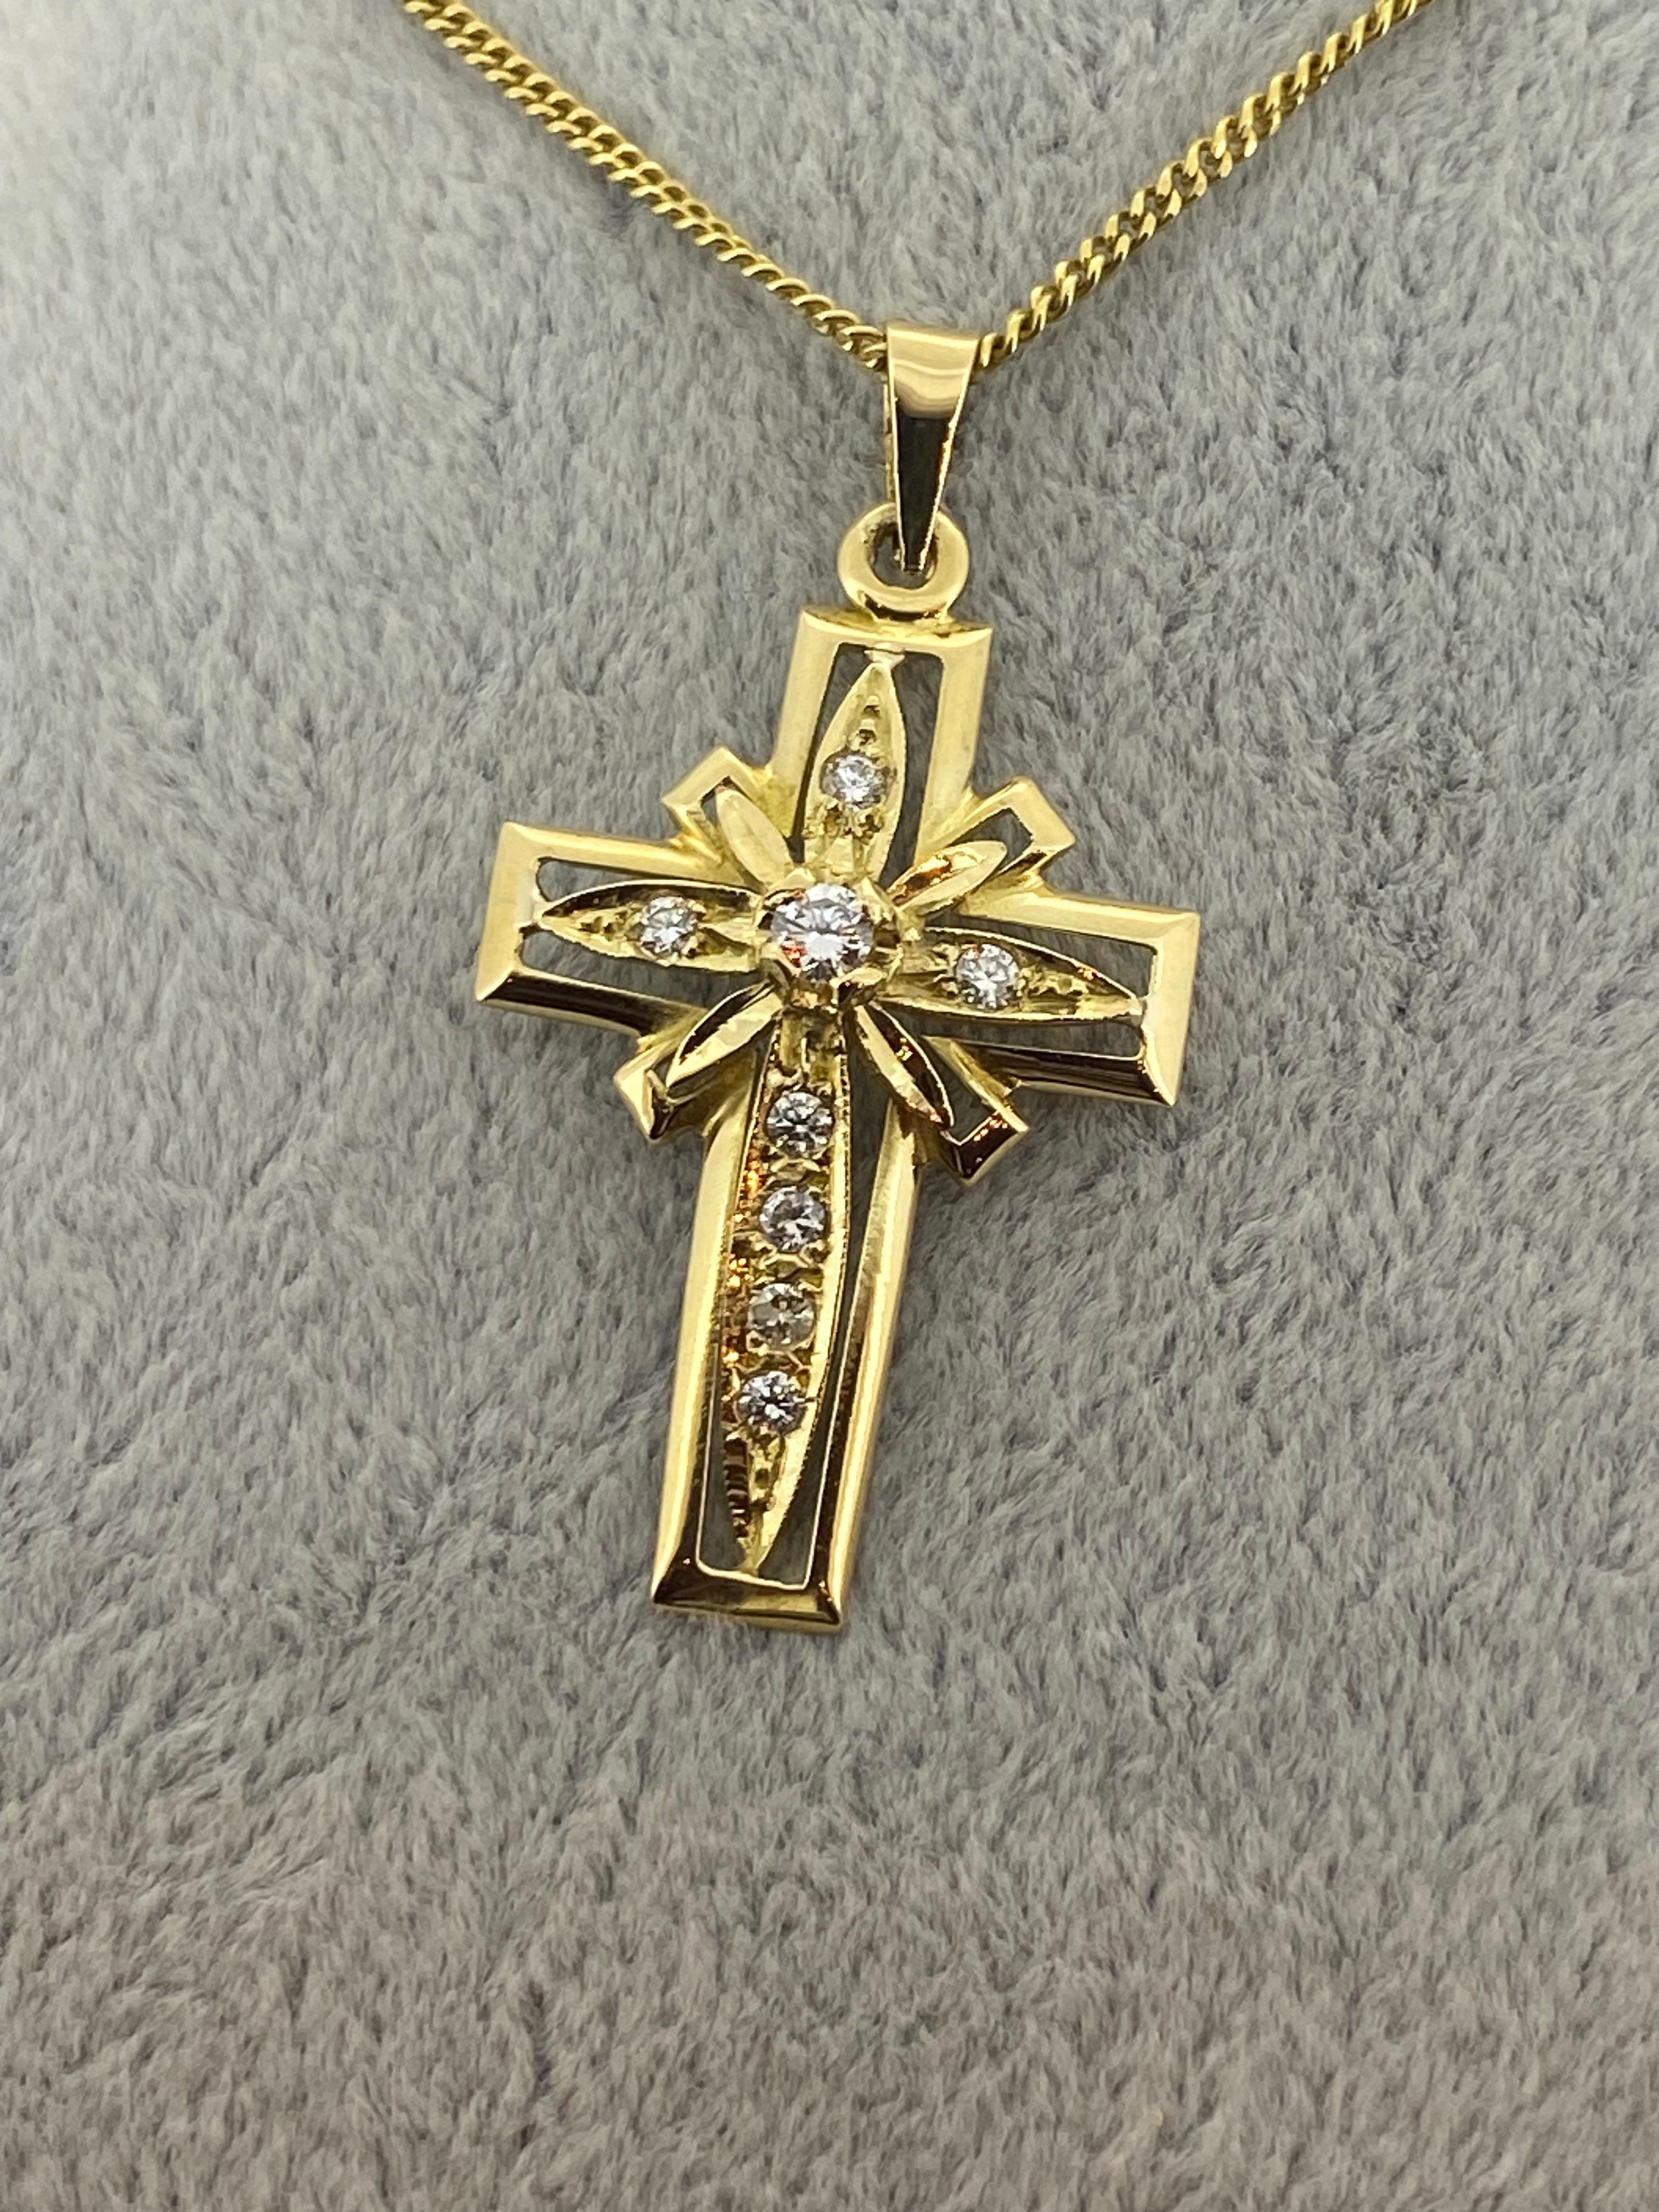 
18K Yellow Gold Vintage Cross / Crucifix Pendant, 
(stamped 750 to the reverse)
set with 8 round brilliant cut diamonds
of 0.80ct in total approx. 
of G colour, VS/SI clarity 

Total item's weight: 4.3gr. 
Dimensions: 42mm (including the bail) x